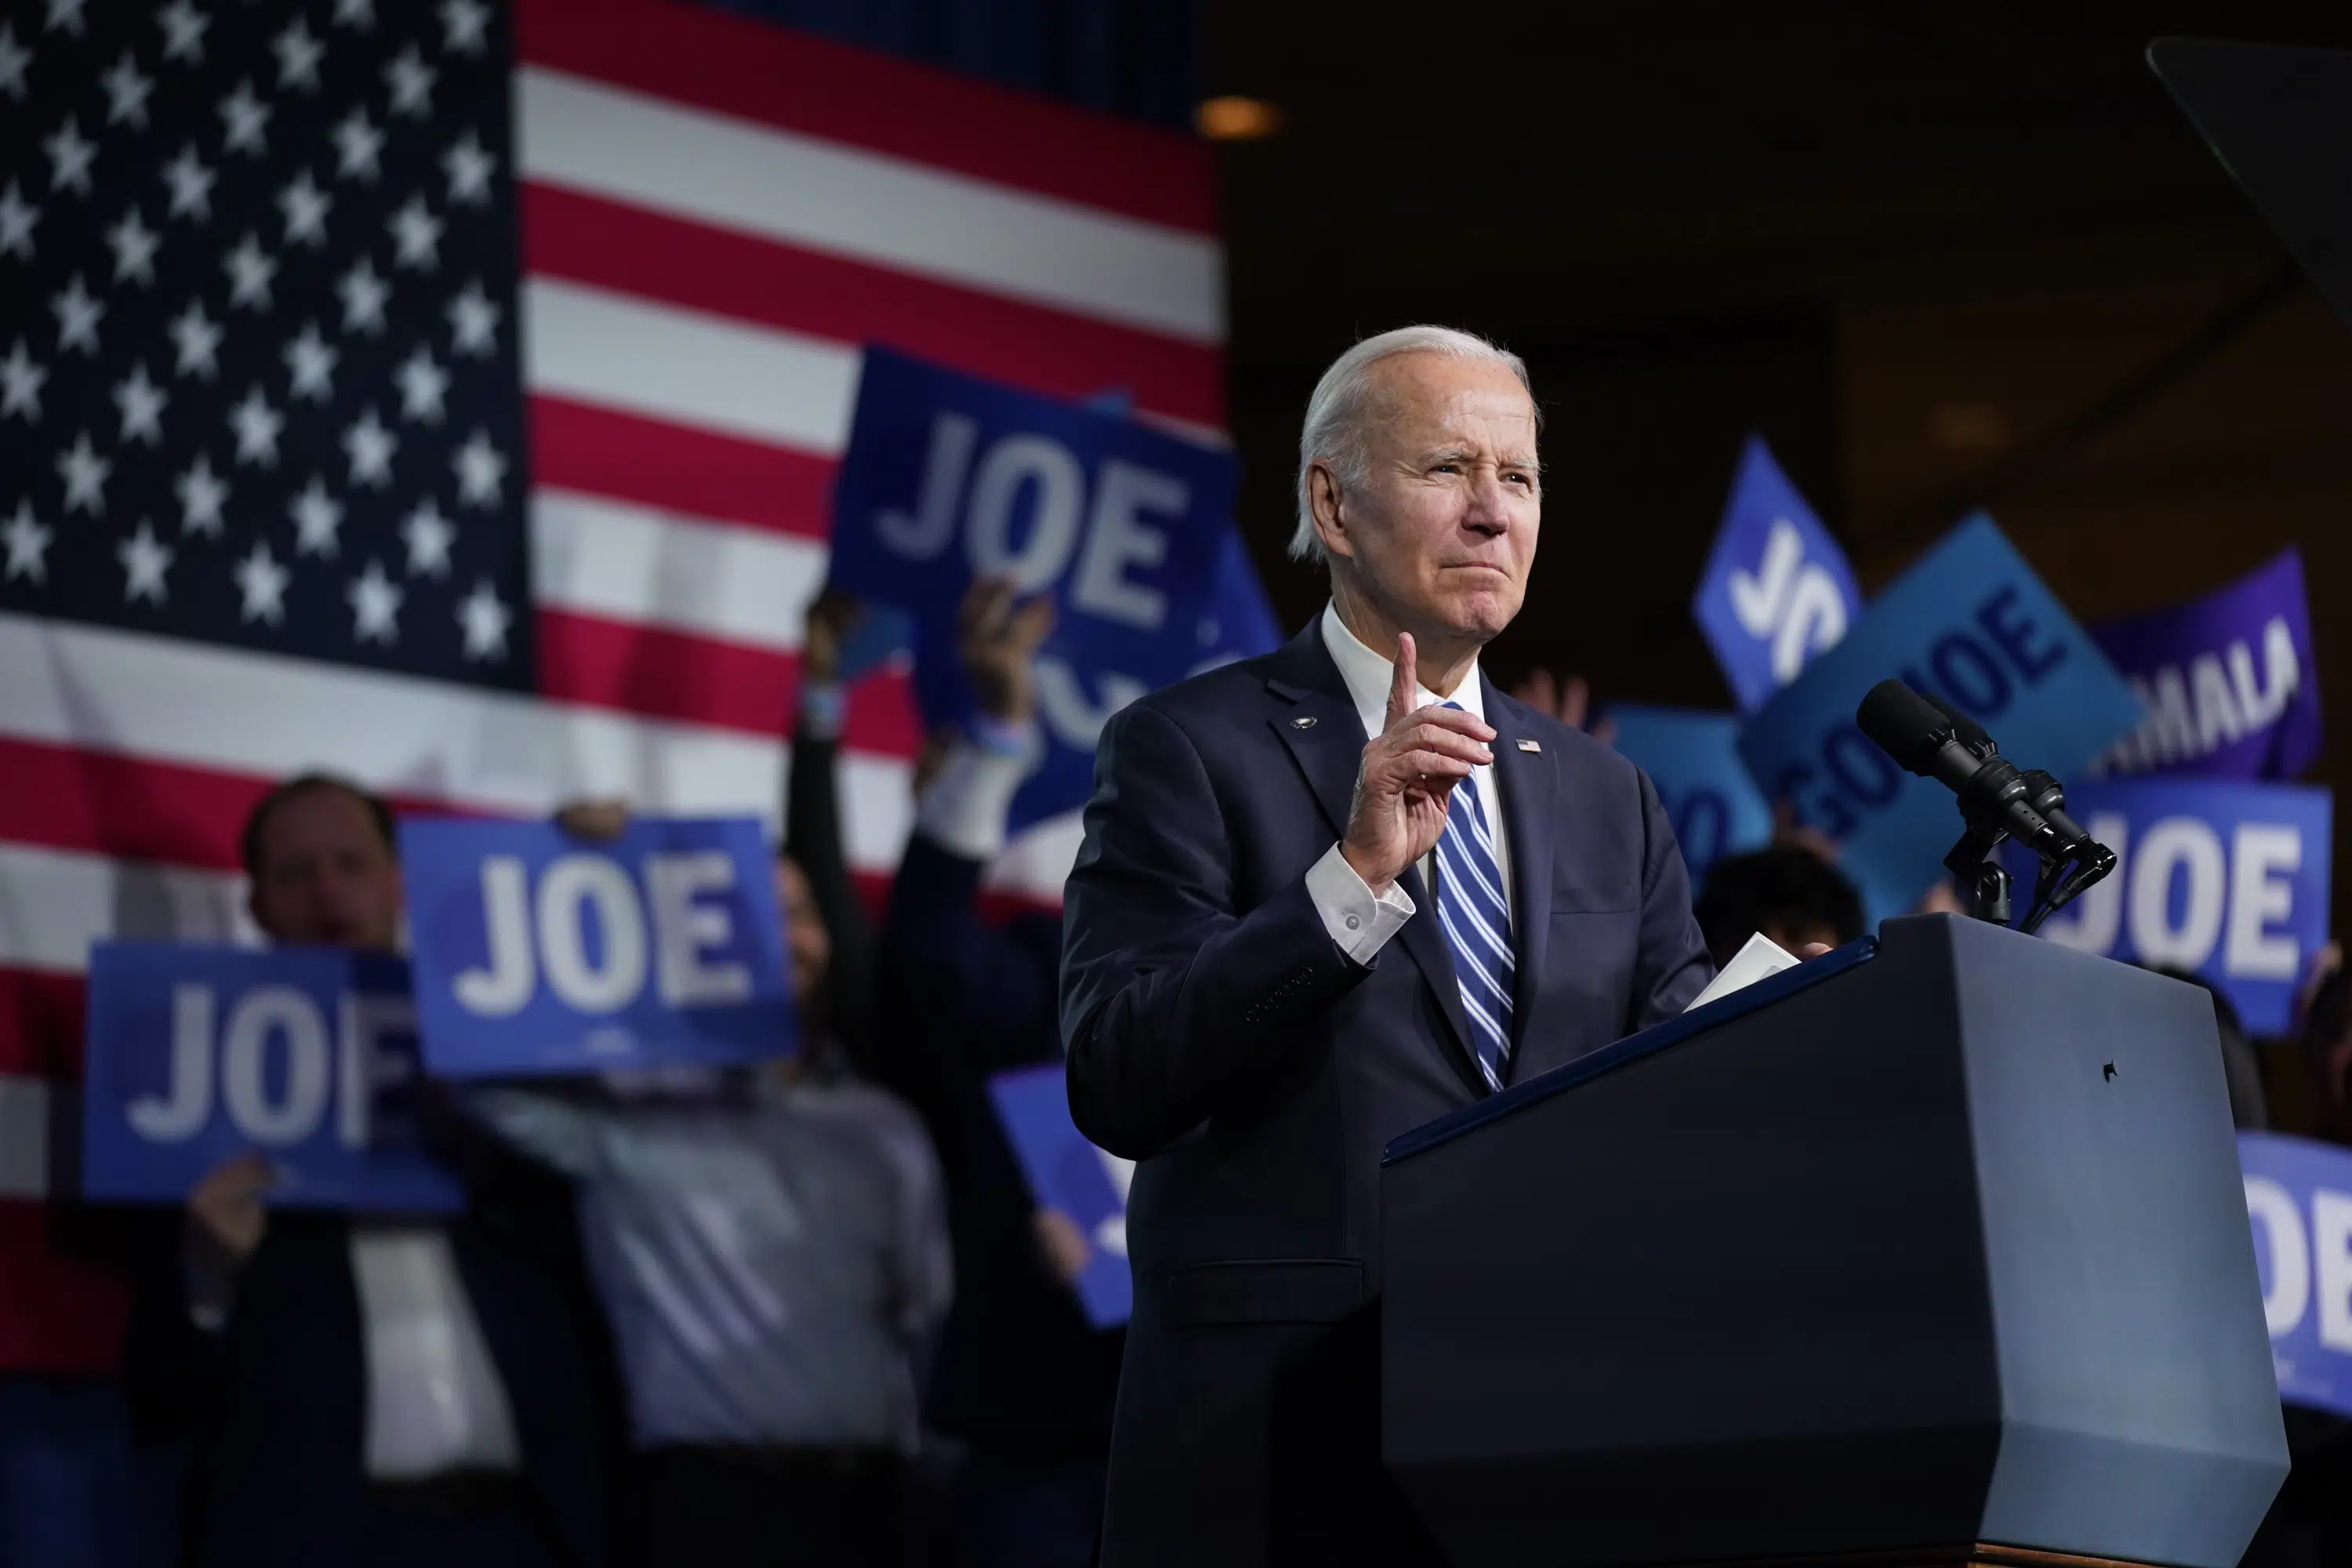 Biden sounds ready to seek 2nd term while rallying Democrats